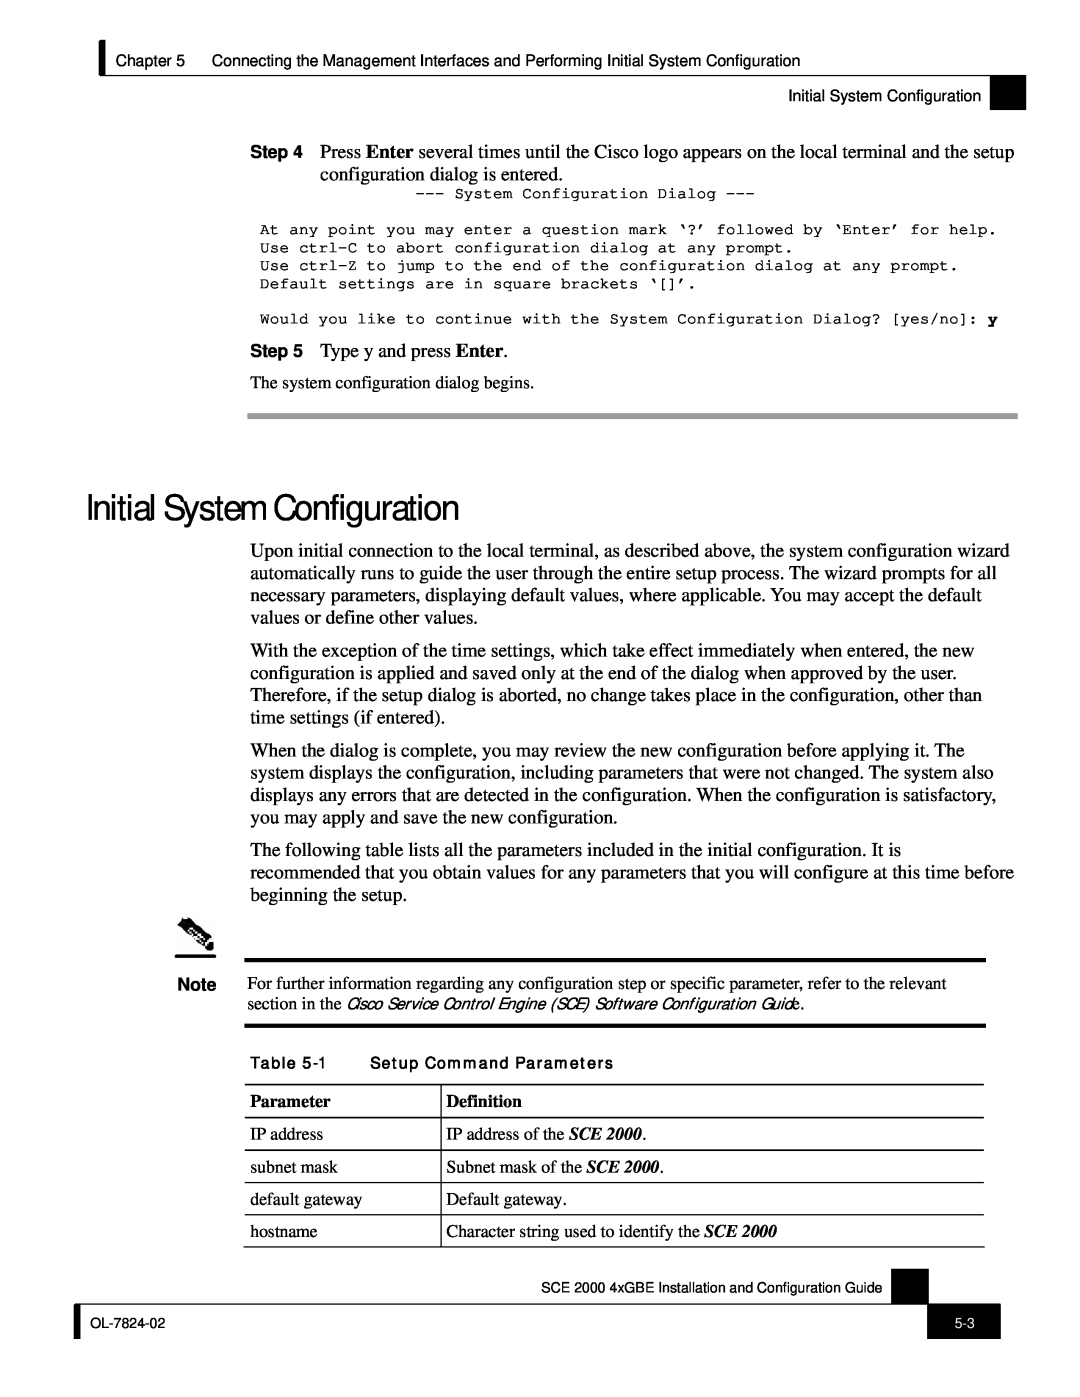 Cisco Systems SCE 2000 4xGBE manual Initial System Configuration 